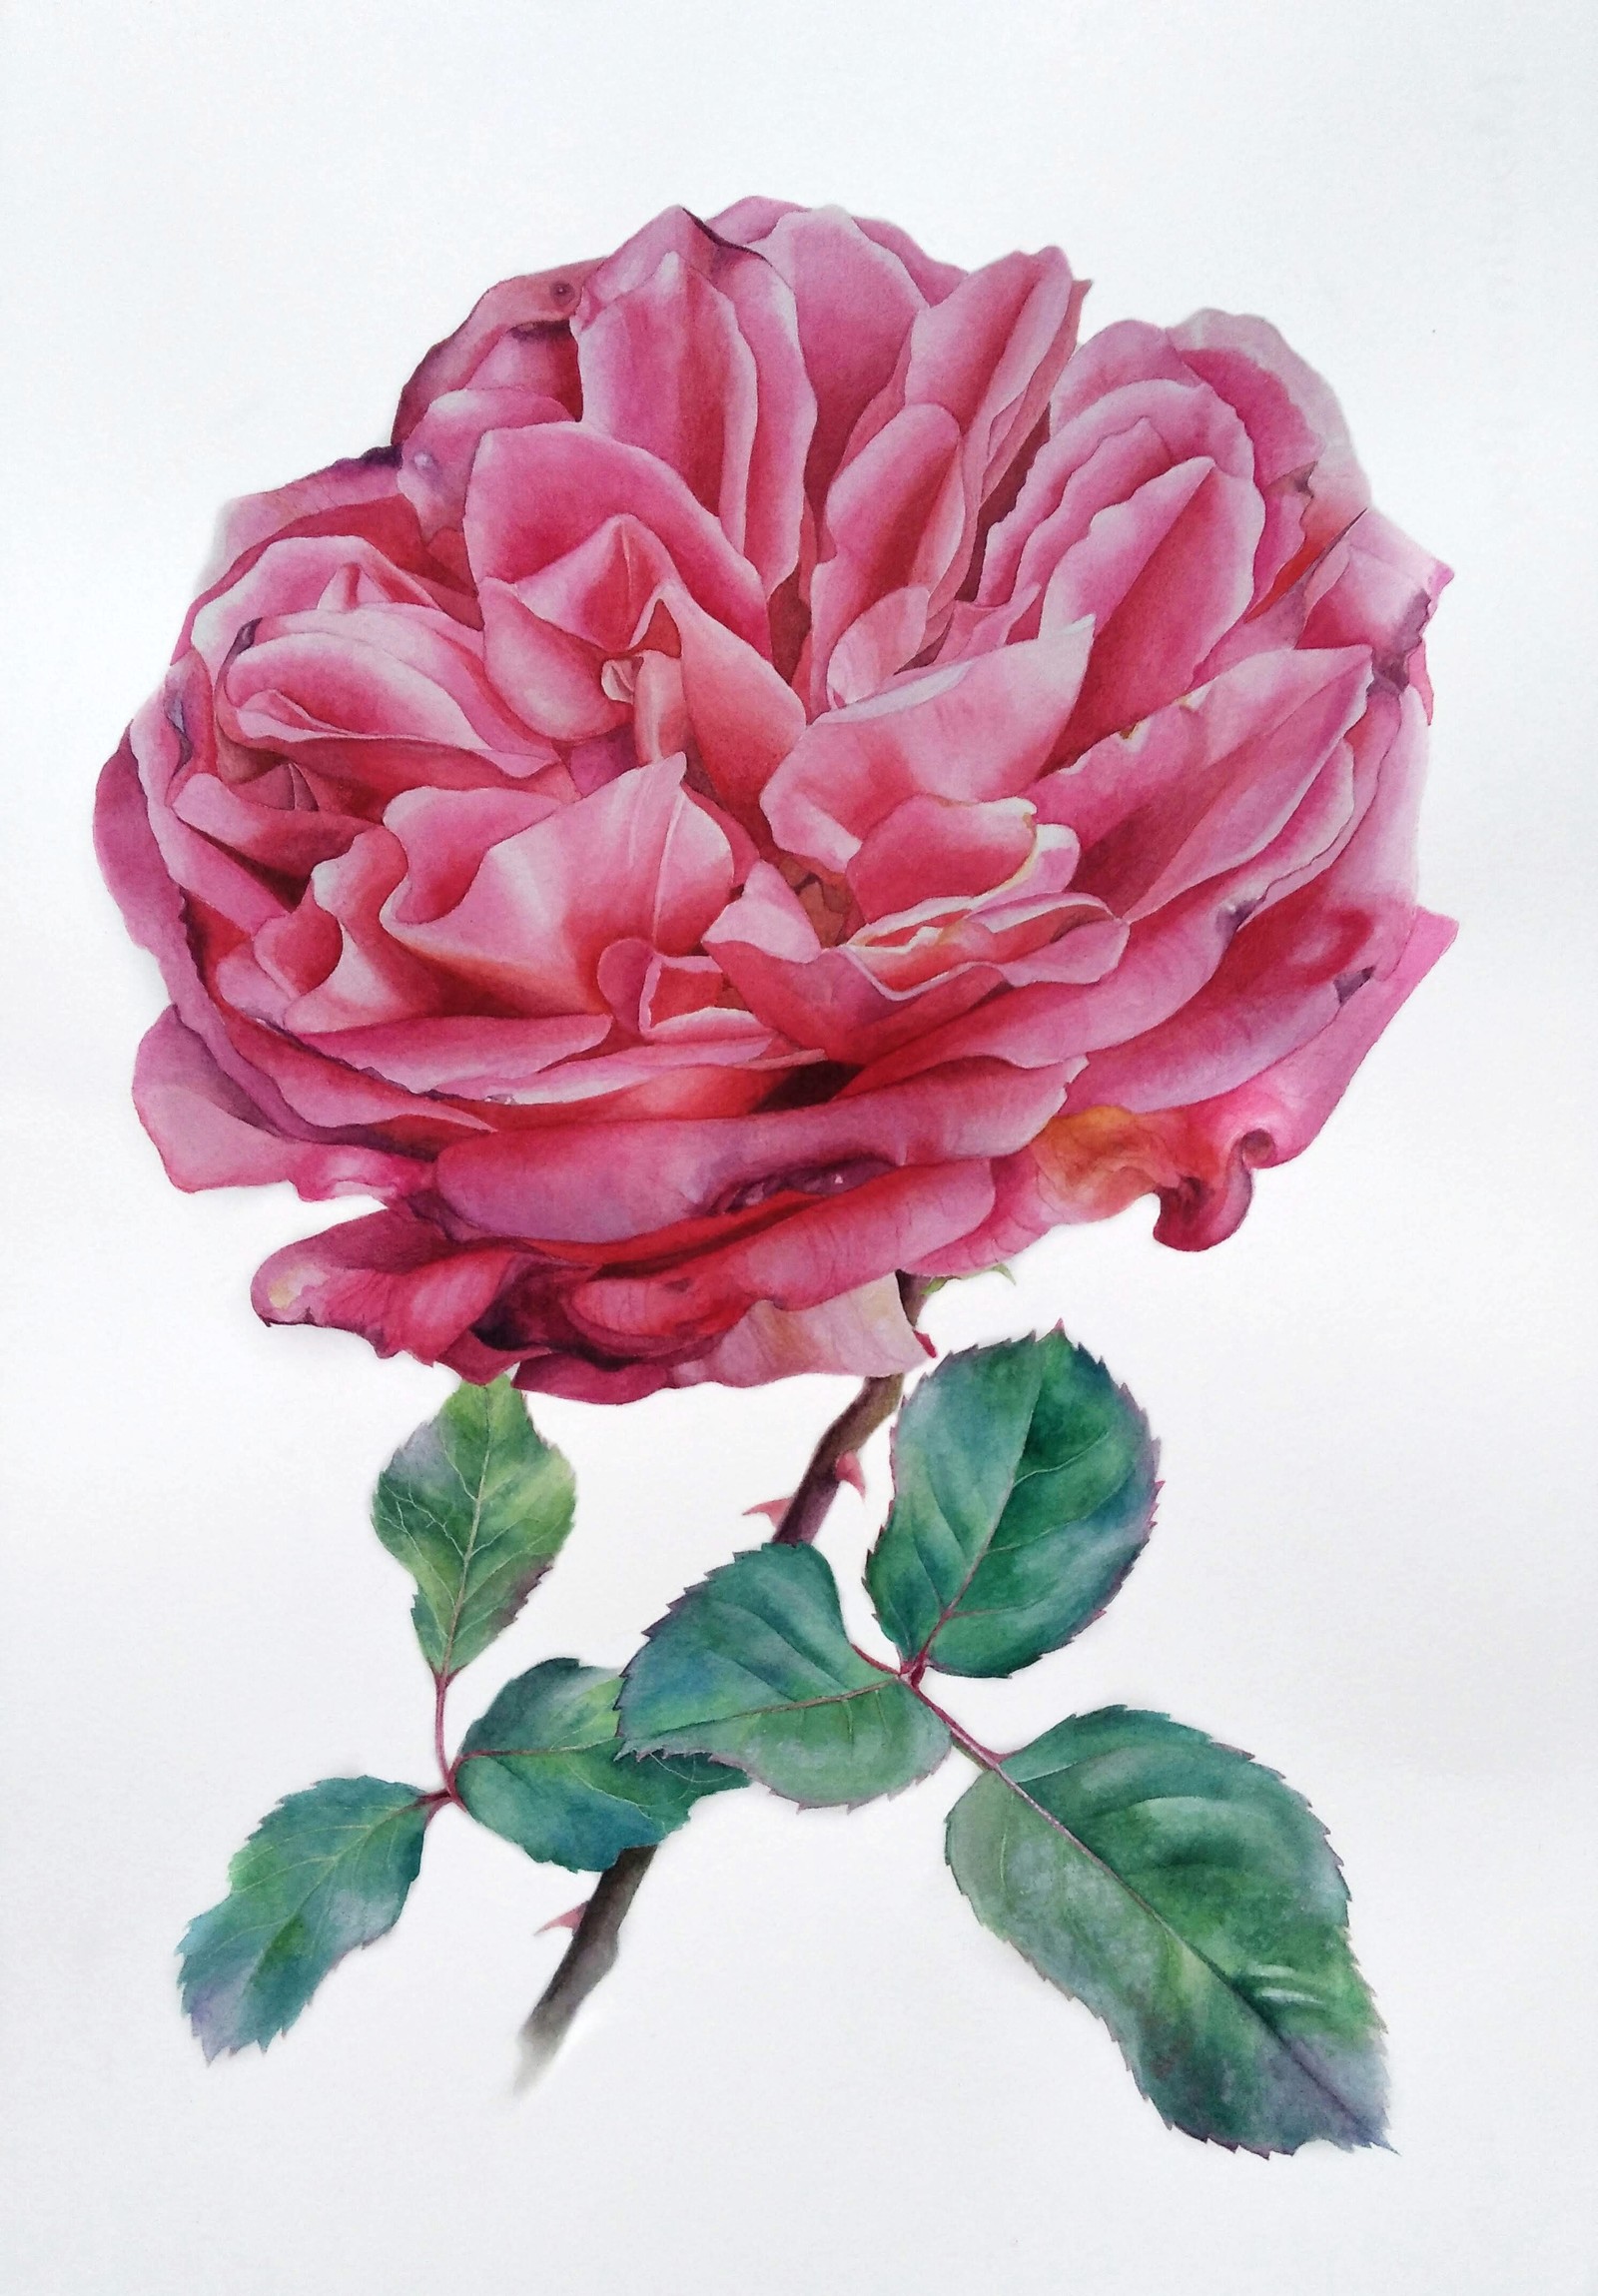 Rose. Watercolor - My, Watercolor, Botanical illustration, Drawing, the Rose, Flowers, Hyperrealism